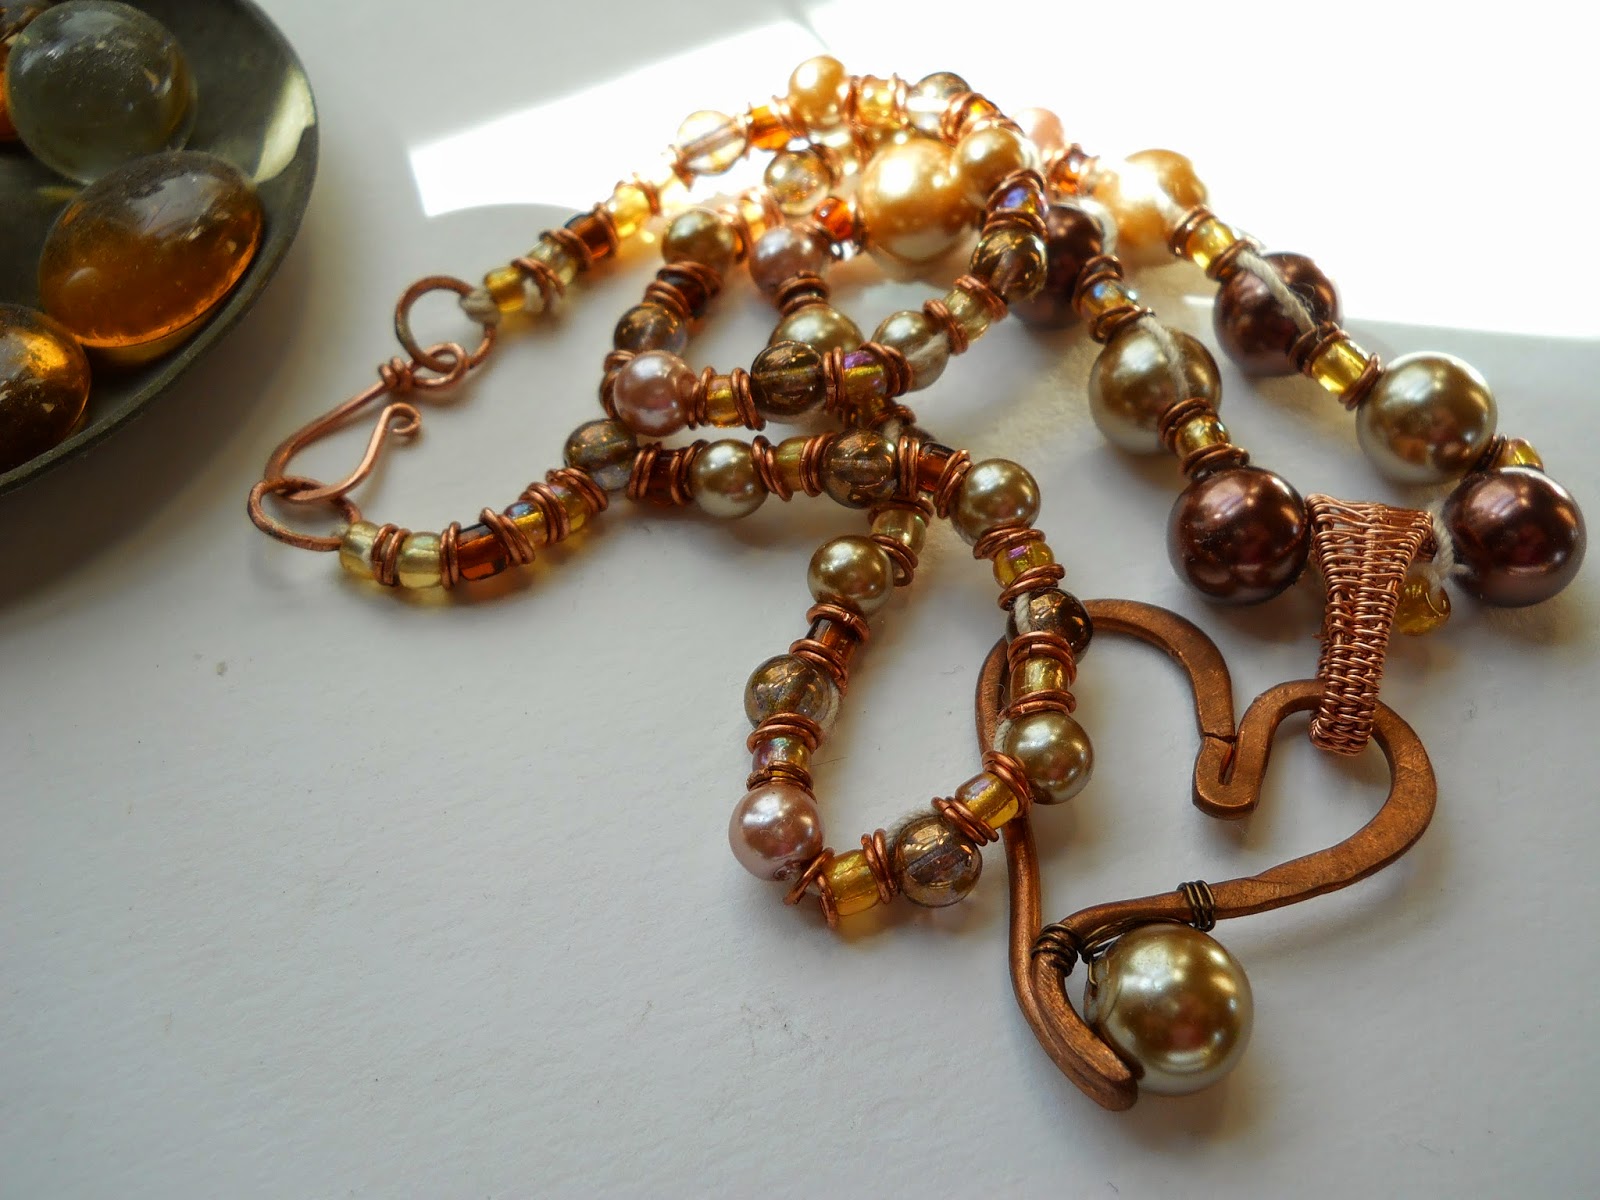 Glass beads and Pearls in warm rich coppery tones with copper accents and copper heart pendant.